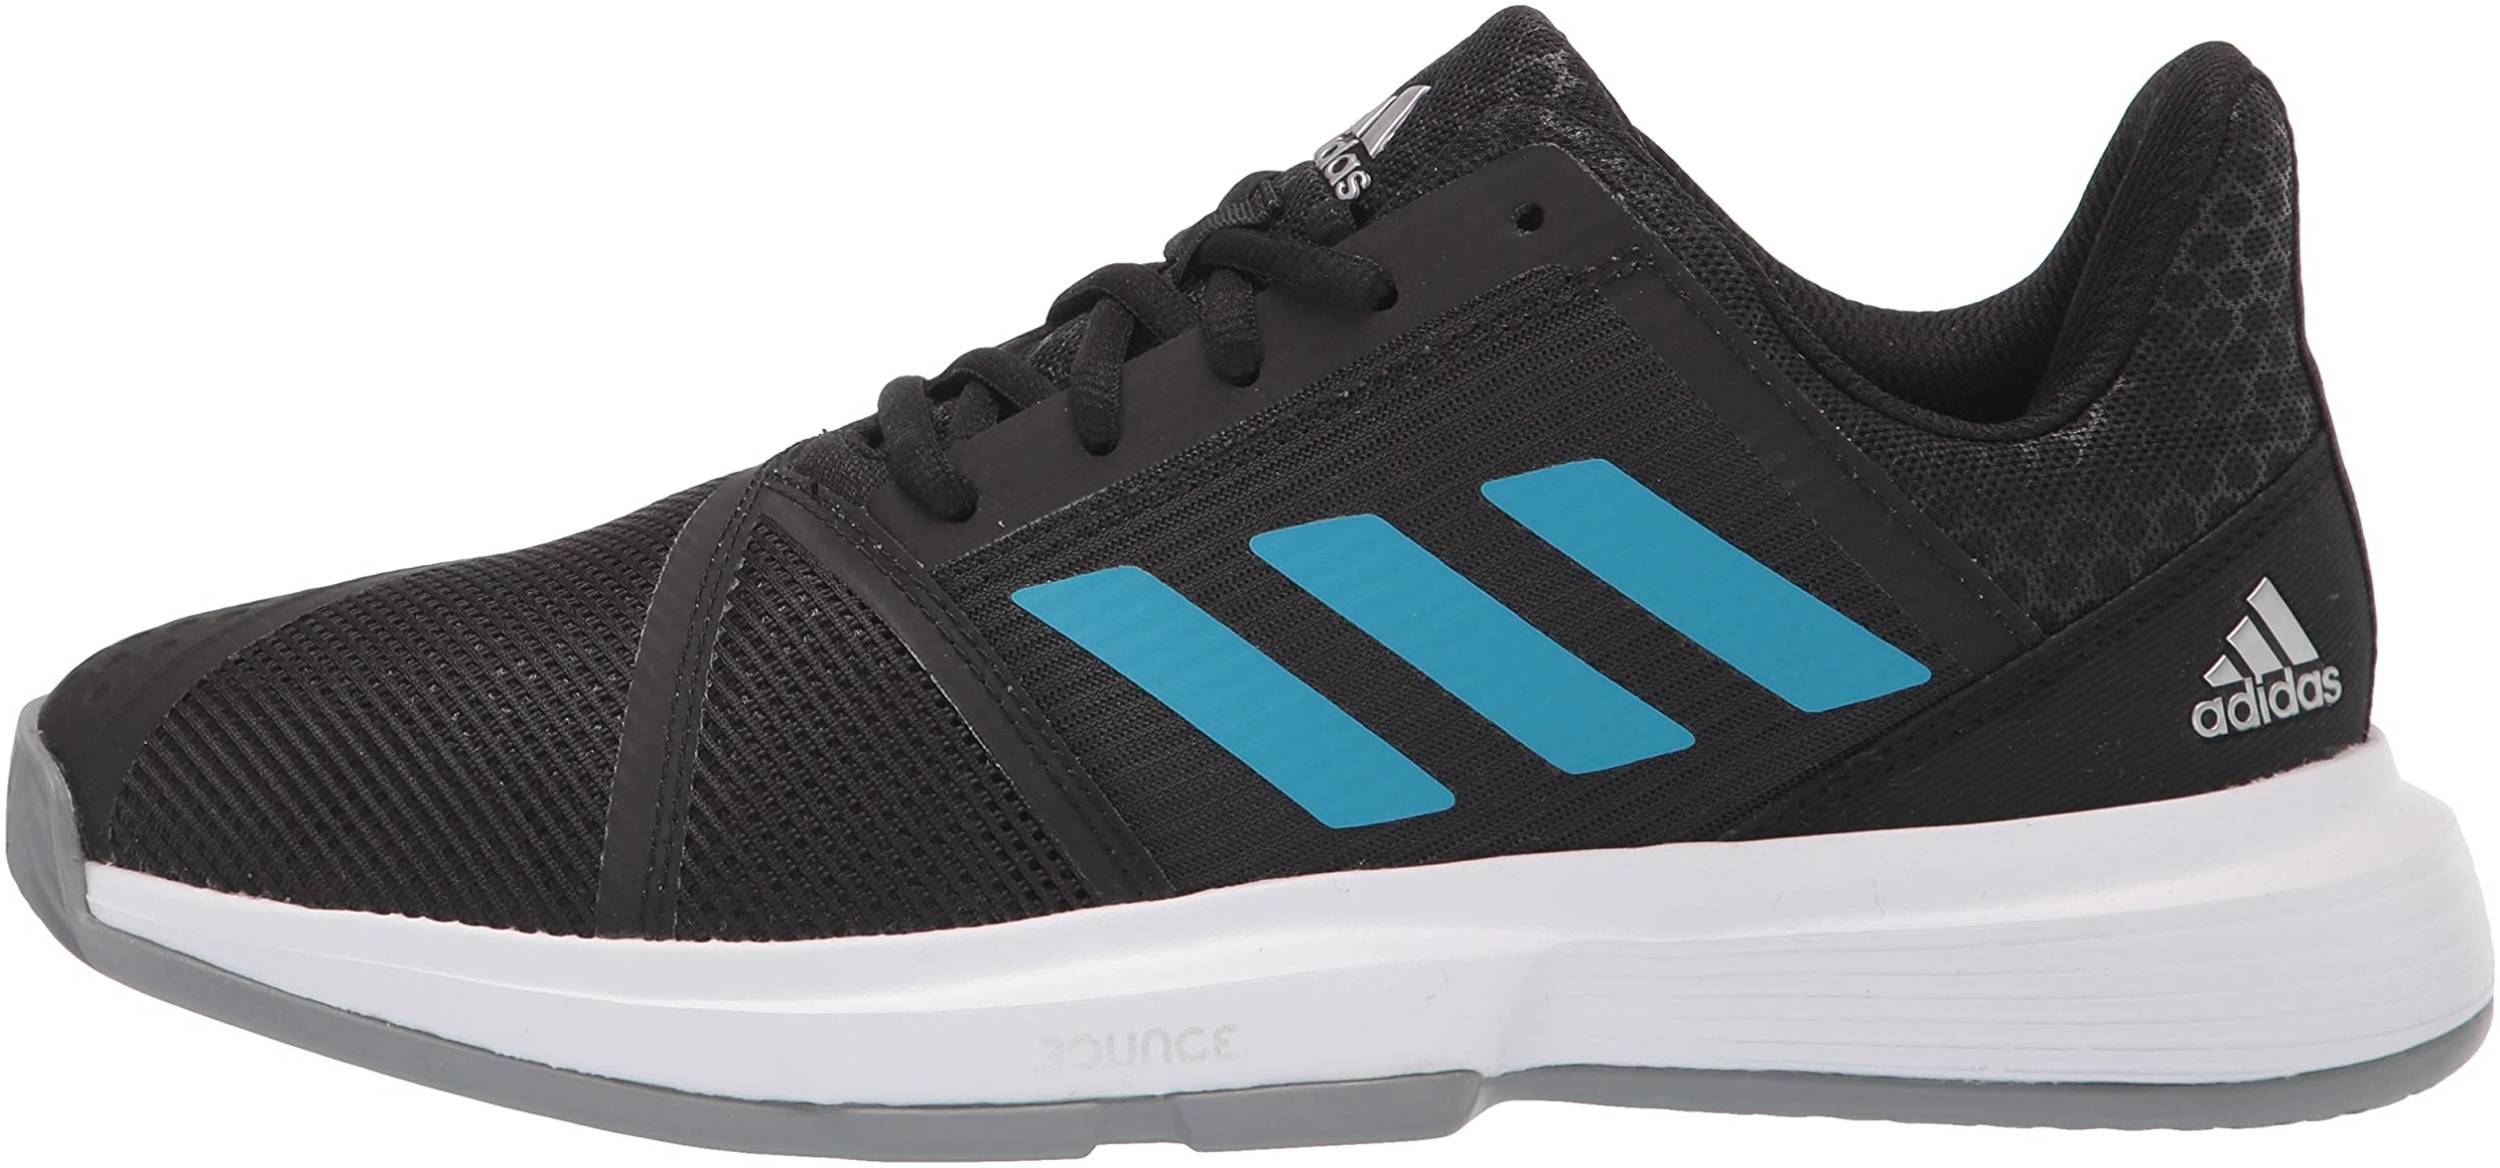 Adidas CourtJam Bounce - Deals ($63), Facts, Reviews (2021 ...